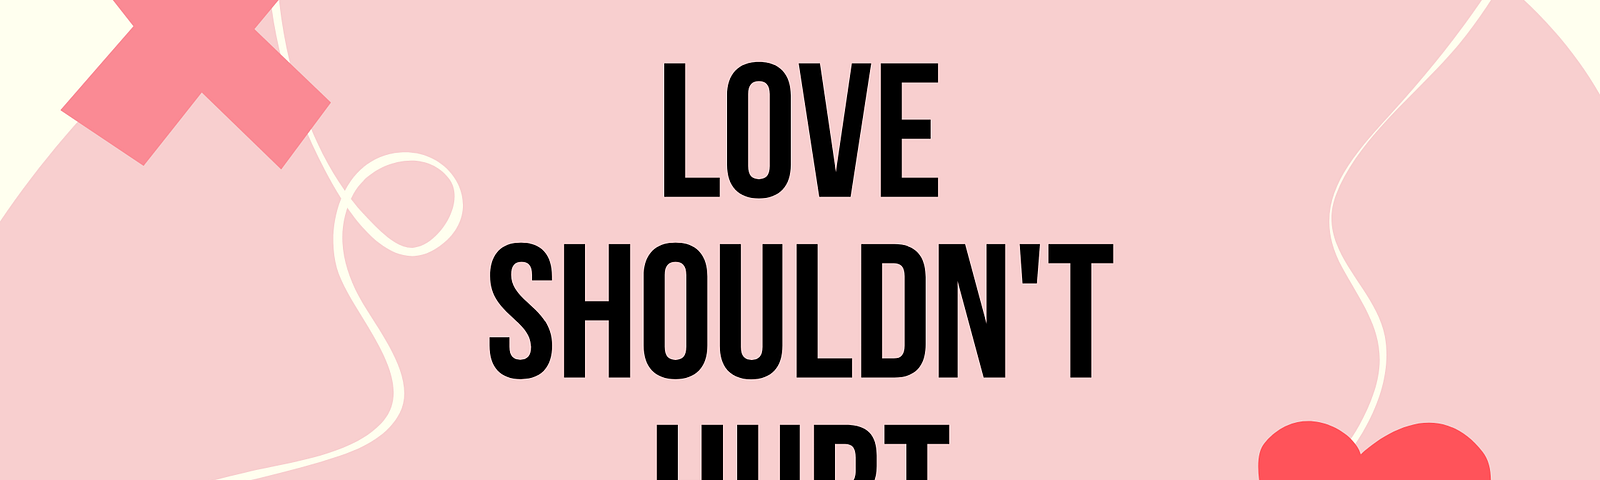 The words “Love Shouldn’t Hurt” in black on a pink background with yellow swirls. An x is in dark pink in the top left corner and a red heart is in the lower right. The My Choices Foundation logo is in smaller letters toward the bottom of the image at the center.